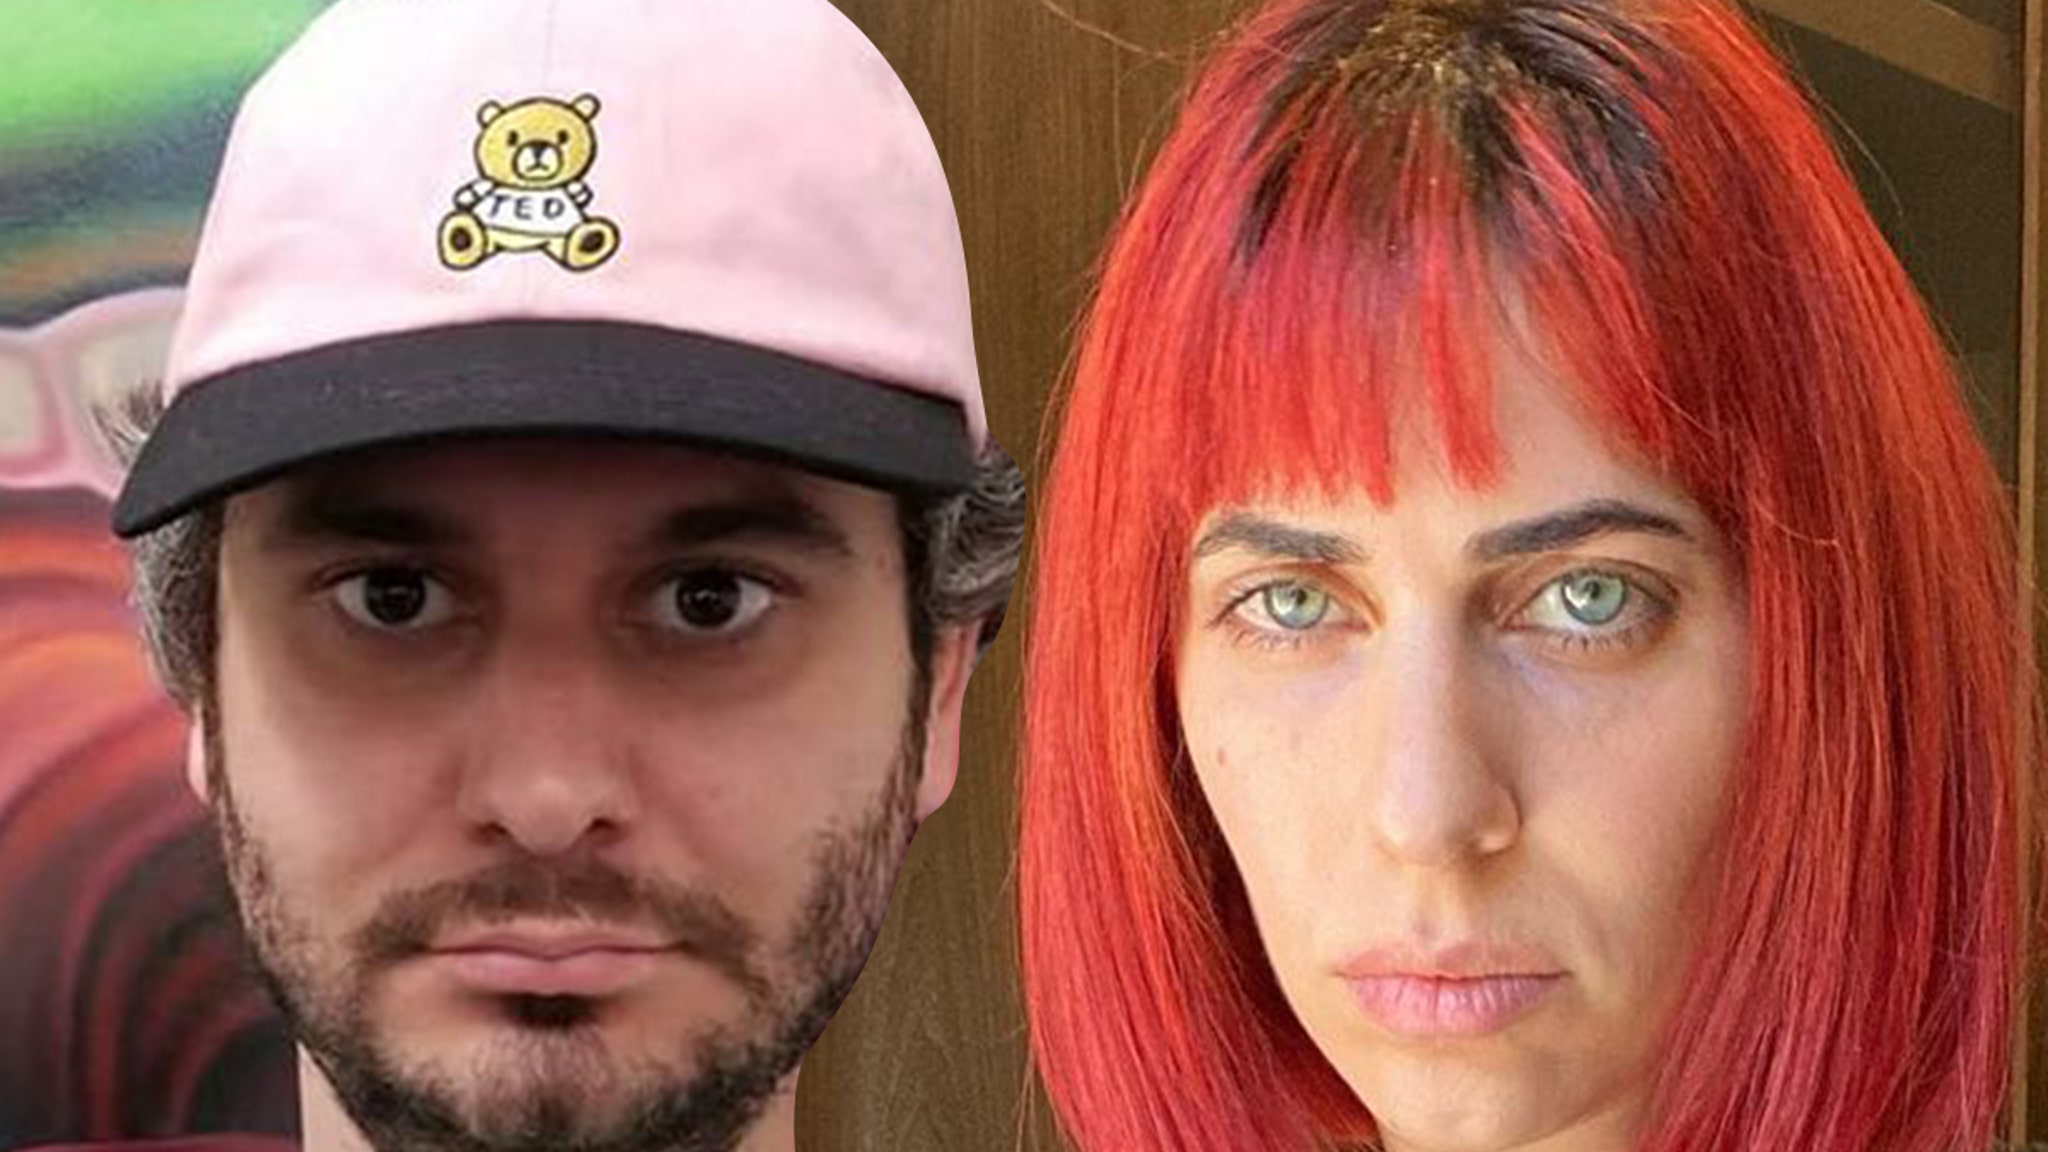 YouTube Stars Ethan, Hila Klein Swatted with Suicide, Murder Calls